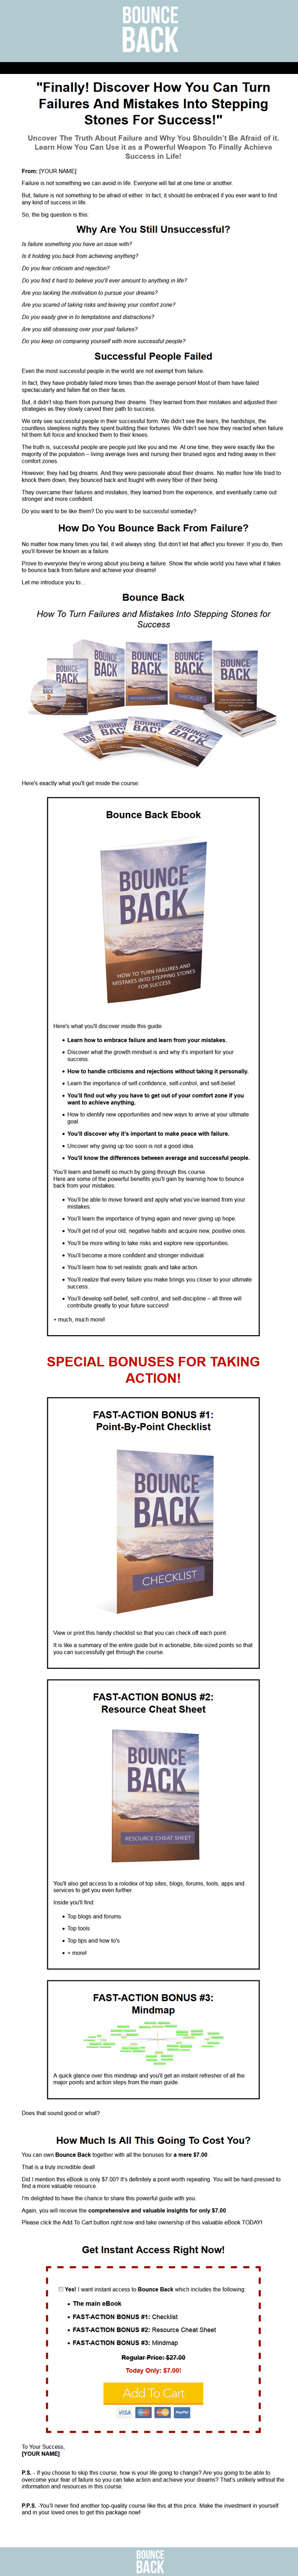 Bounce Back Ebook Package with Master Resale Rights